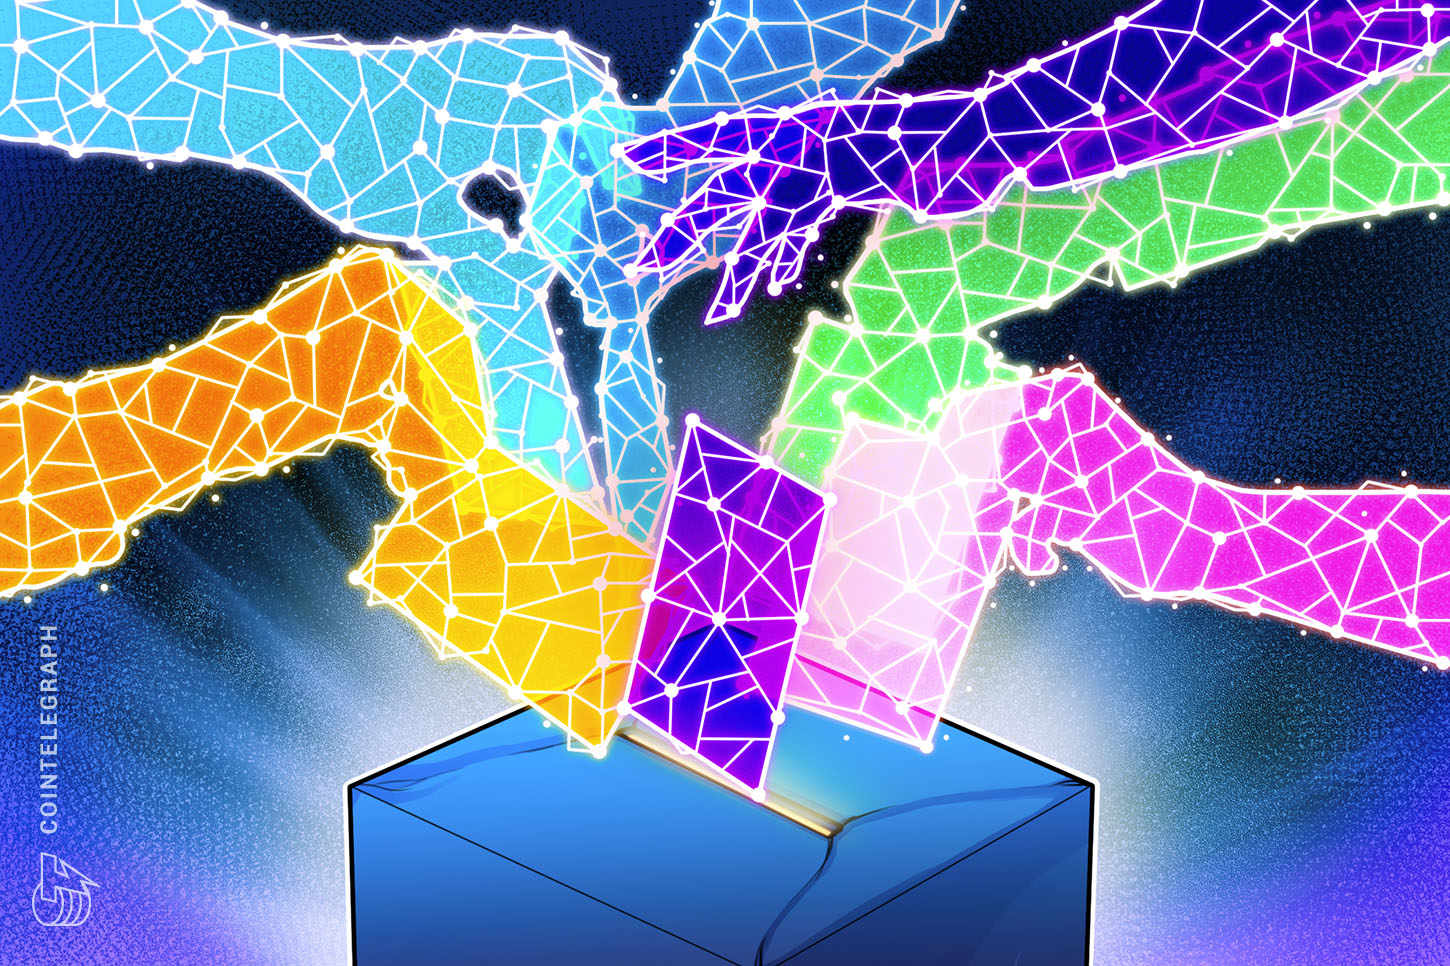 Future elections might be held on the Cardano blockchain, says Hoskinson